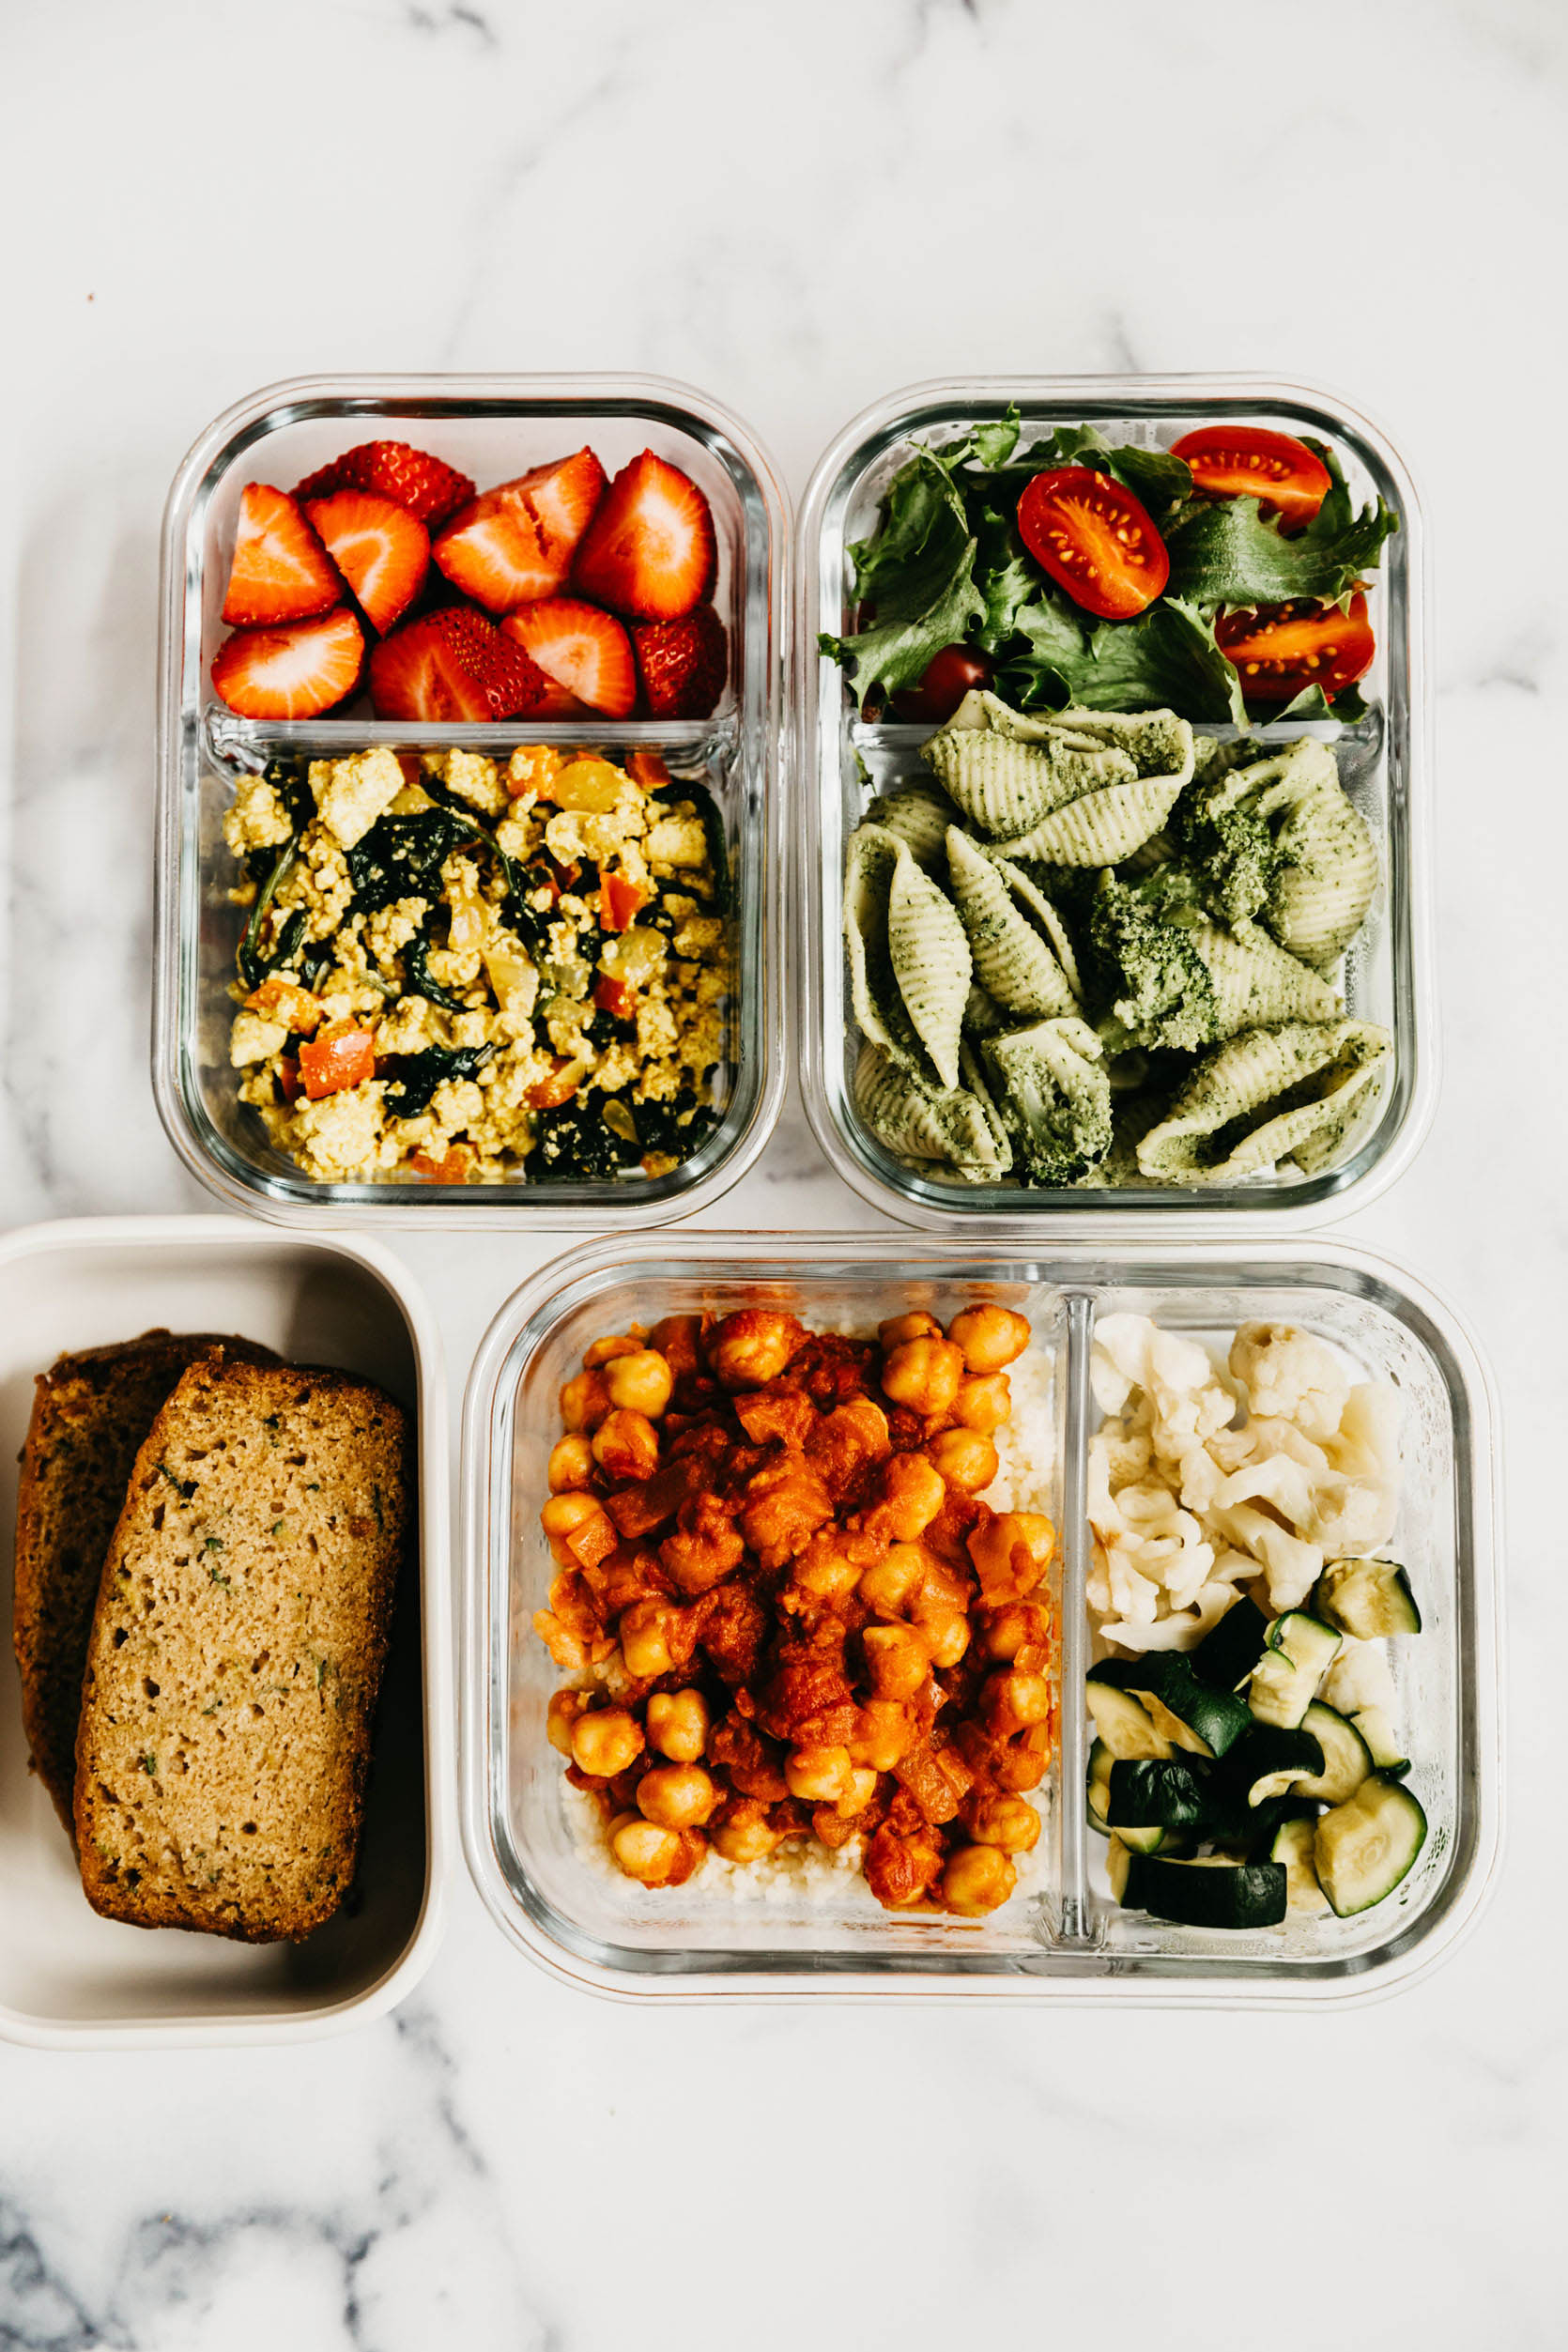 How To Meal Prep: Beginner Meal Prep Ideas, Recipes Tips | lupon.gov.ph